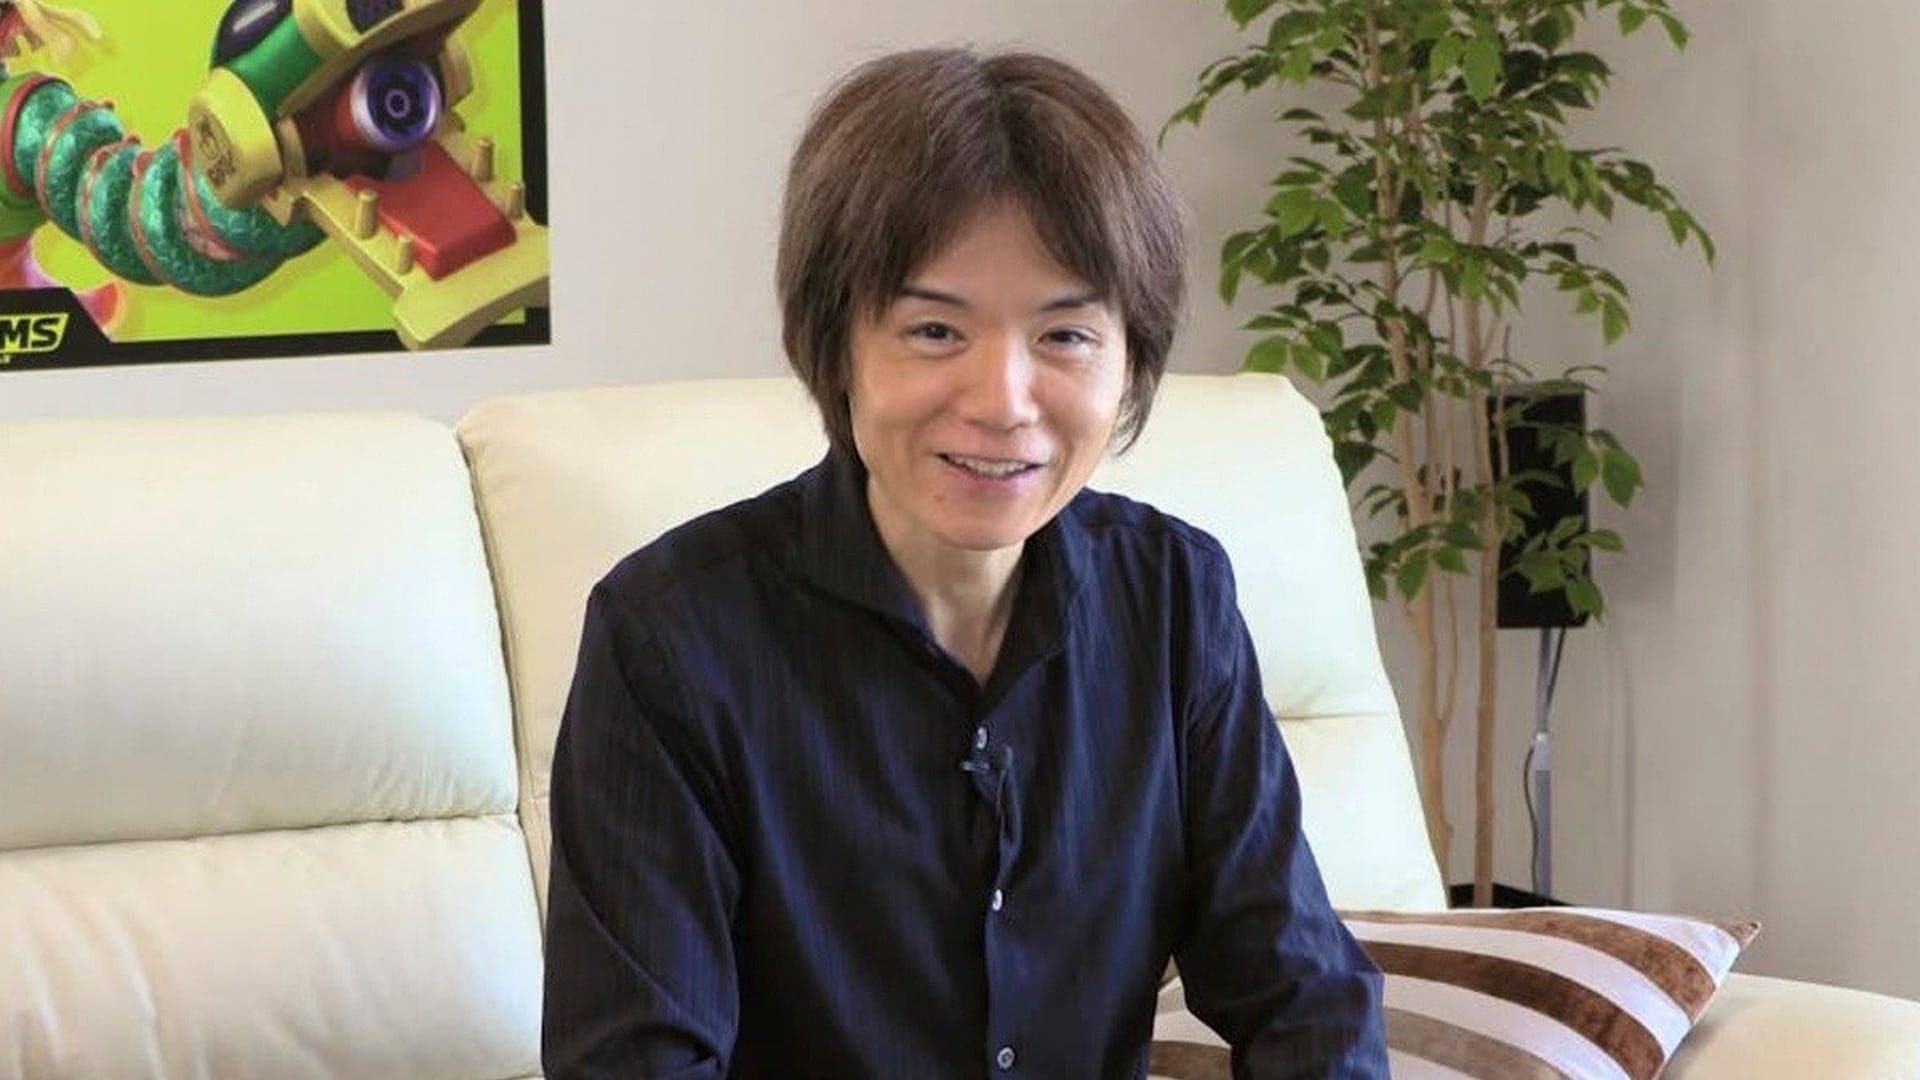 Sakurai shows off the upgraded play space he has at home